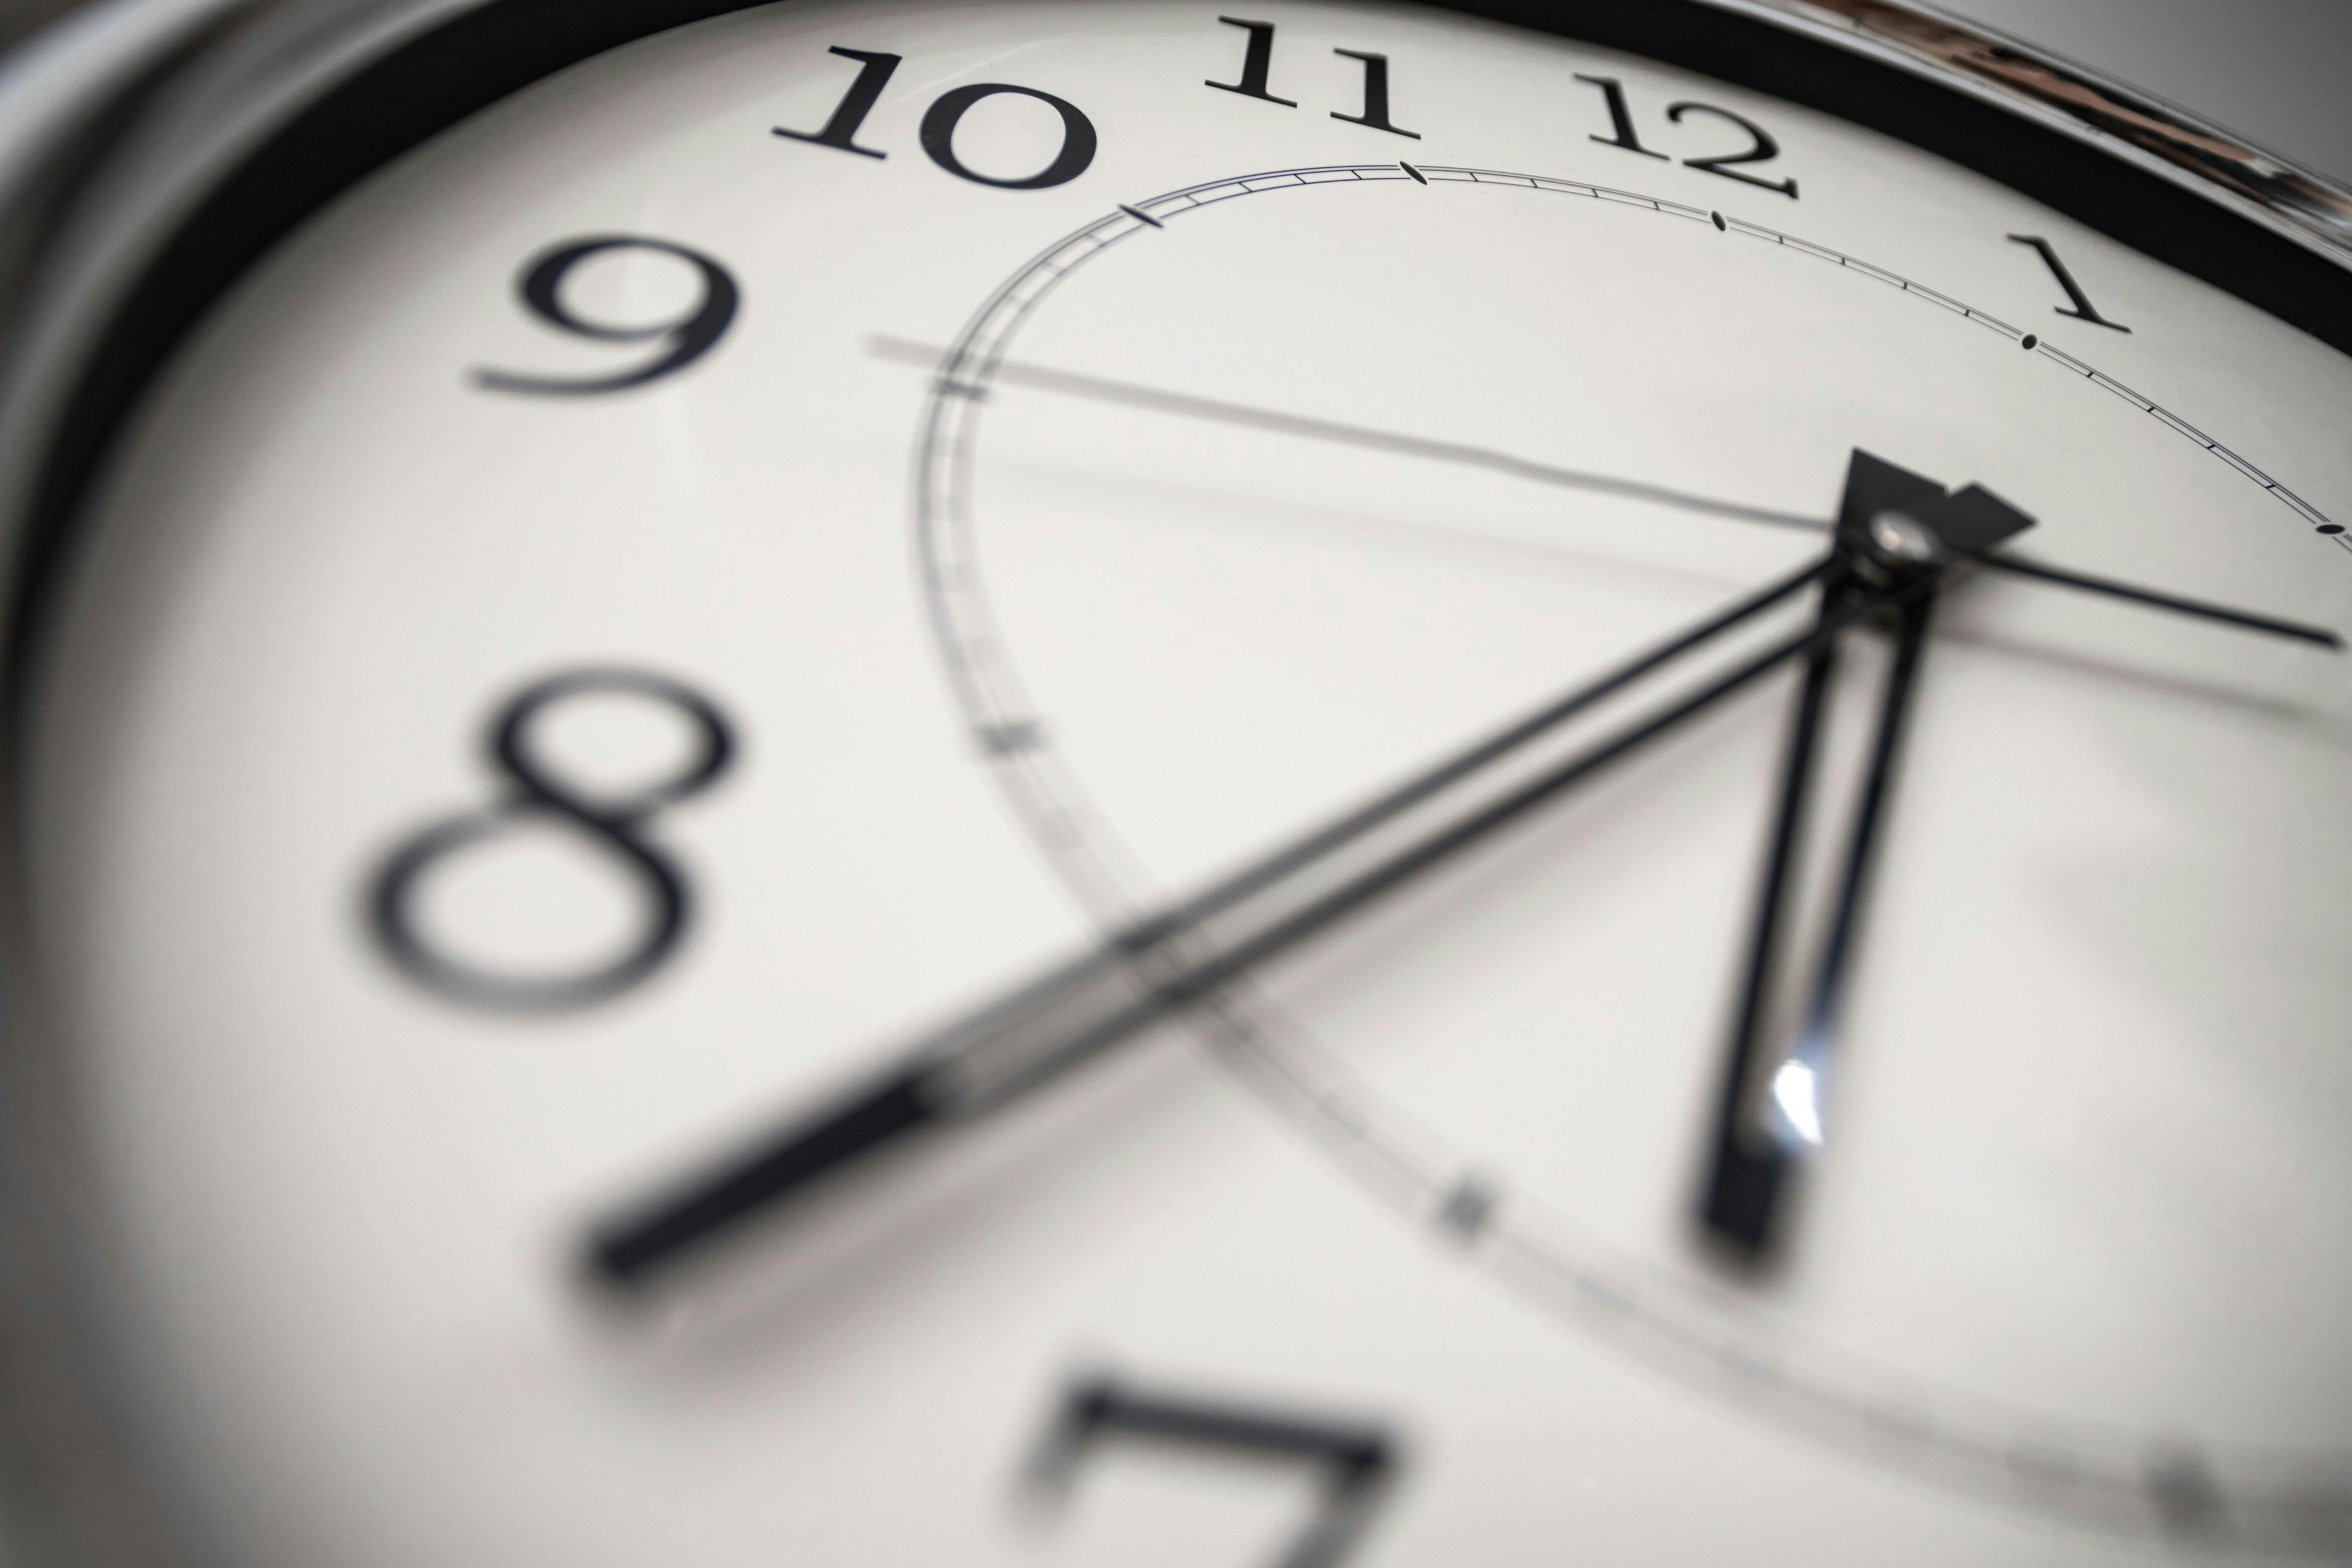 close-up of a clock minute, hour and second hands | Image credit: ©blackday stock.adobe.com